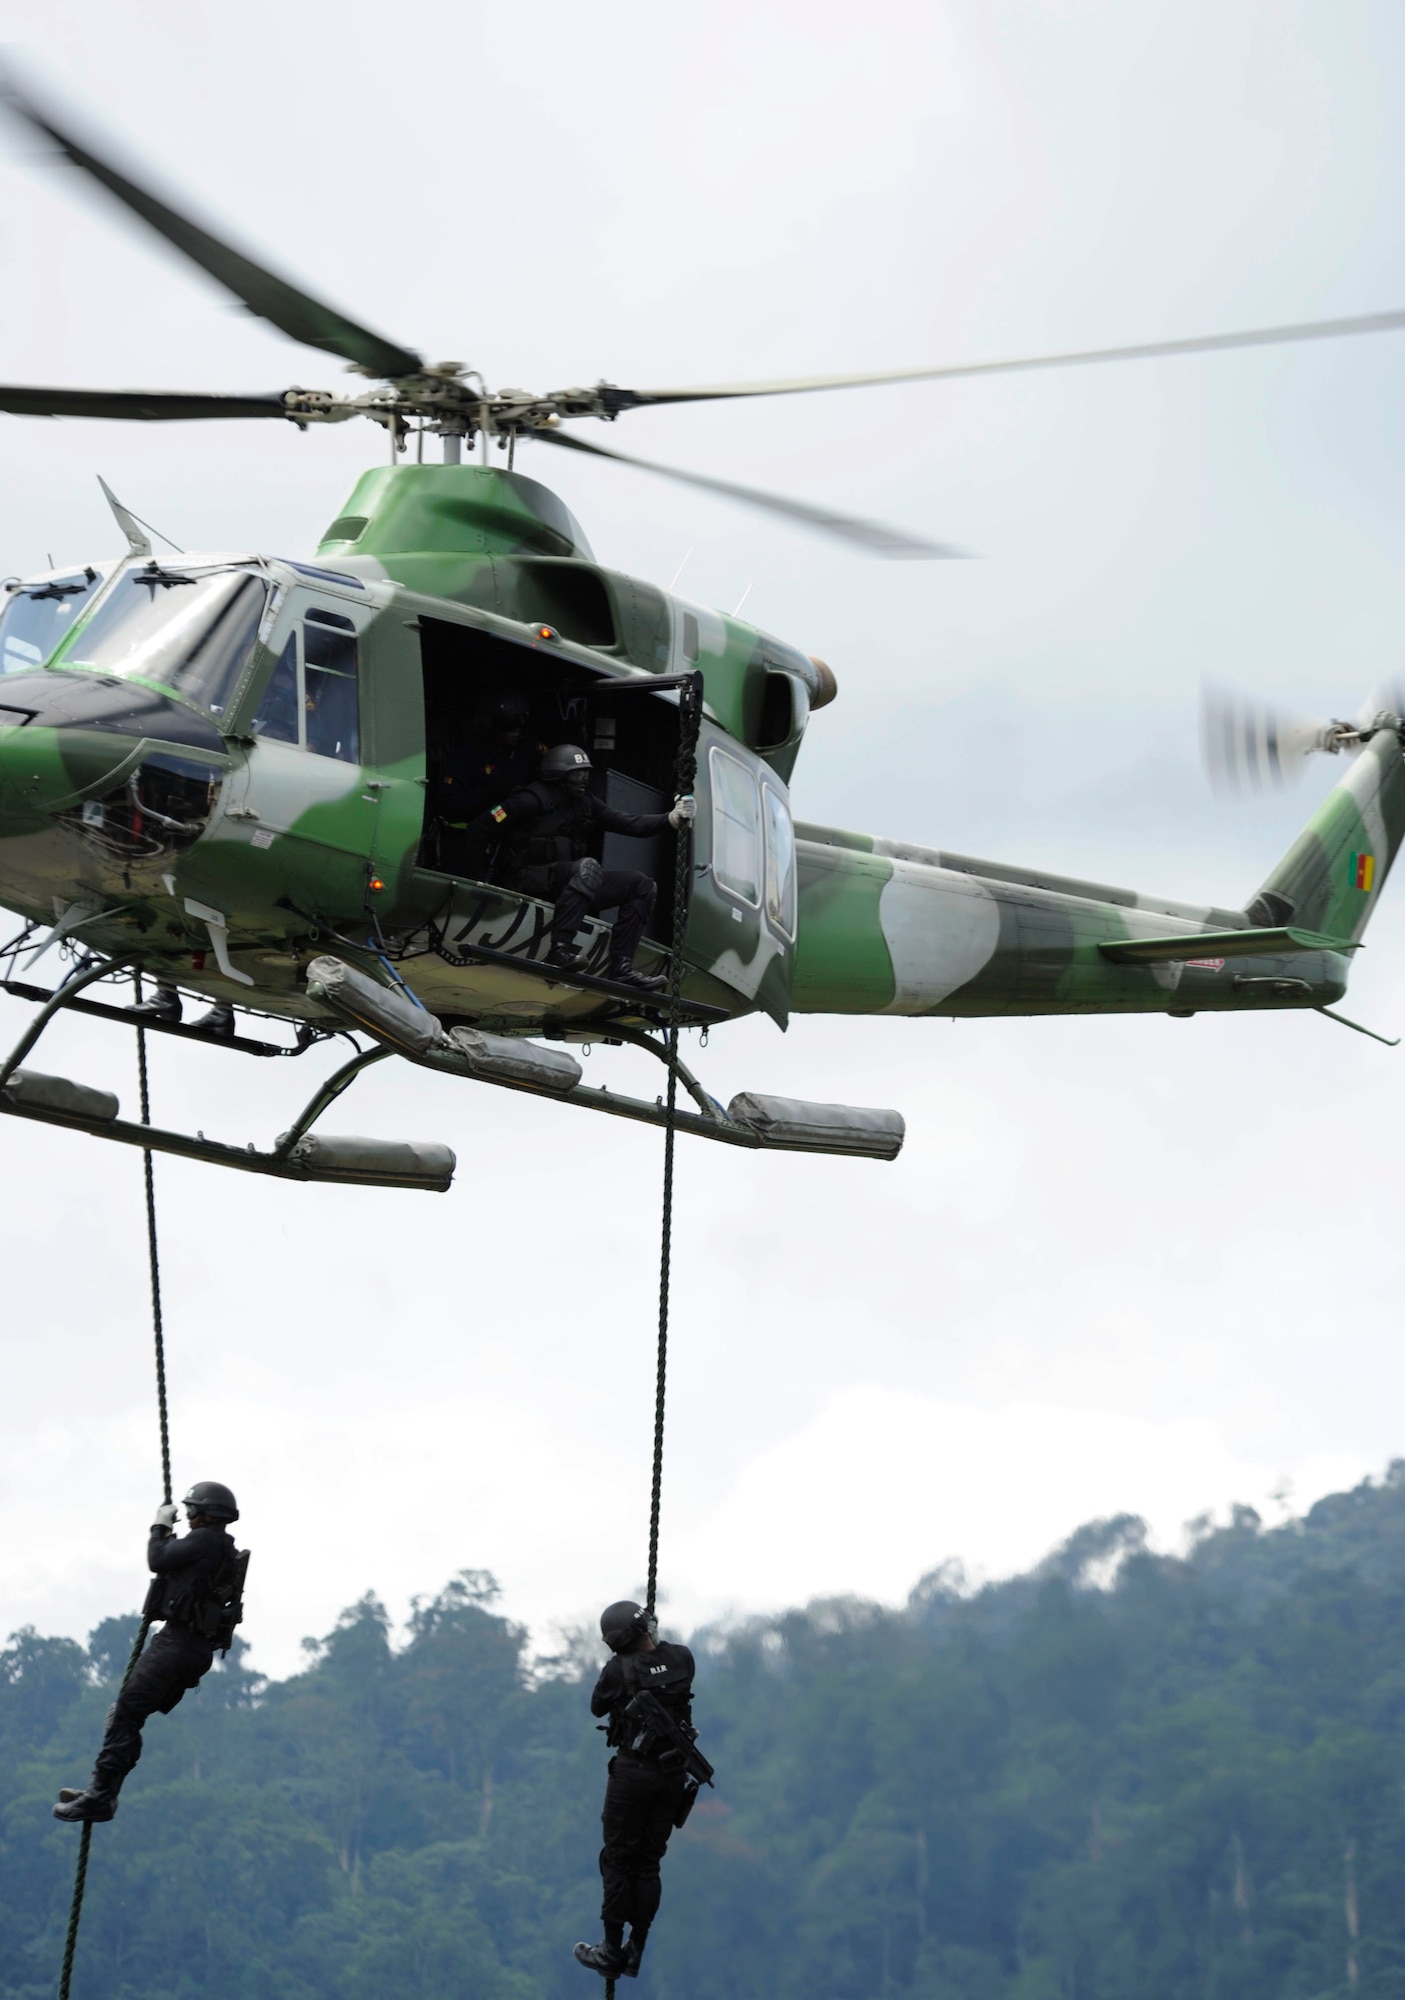 The Rapid Intervention Battalion Base troops give the African Air Chiefs a demonstration of their capabilities. Since 2010, year of RIB creation more than 75 percent of their missions conducted pertained to operations or campaigns. Sept. 10, 2014, RIB Base, Cameroon. (U.S. Air Force photo by Tech Sgt. Patrick Mitchell)